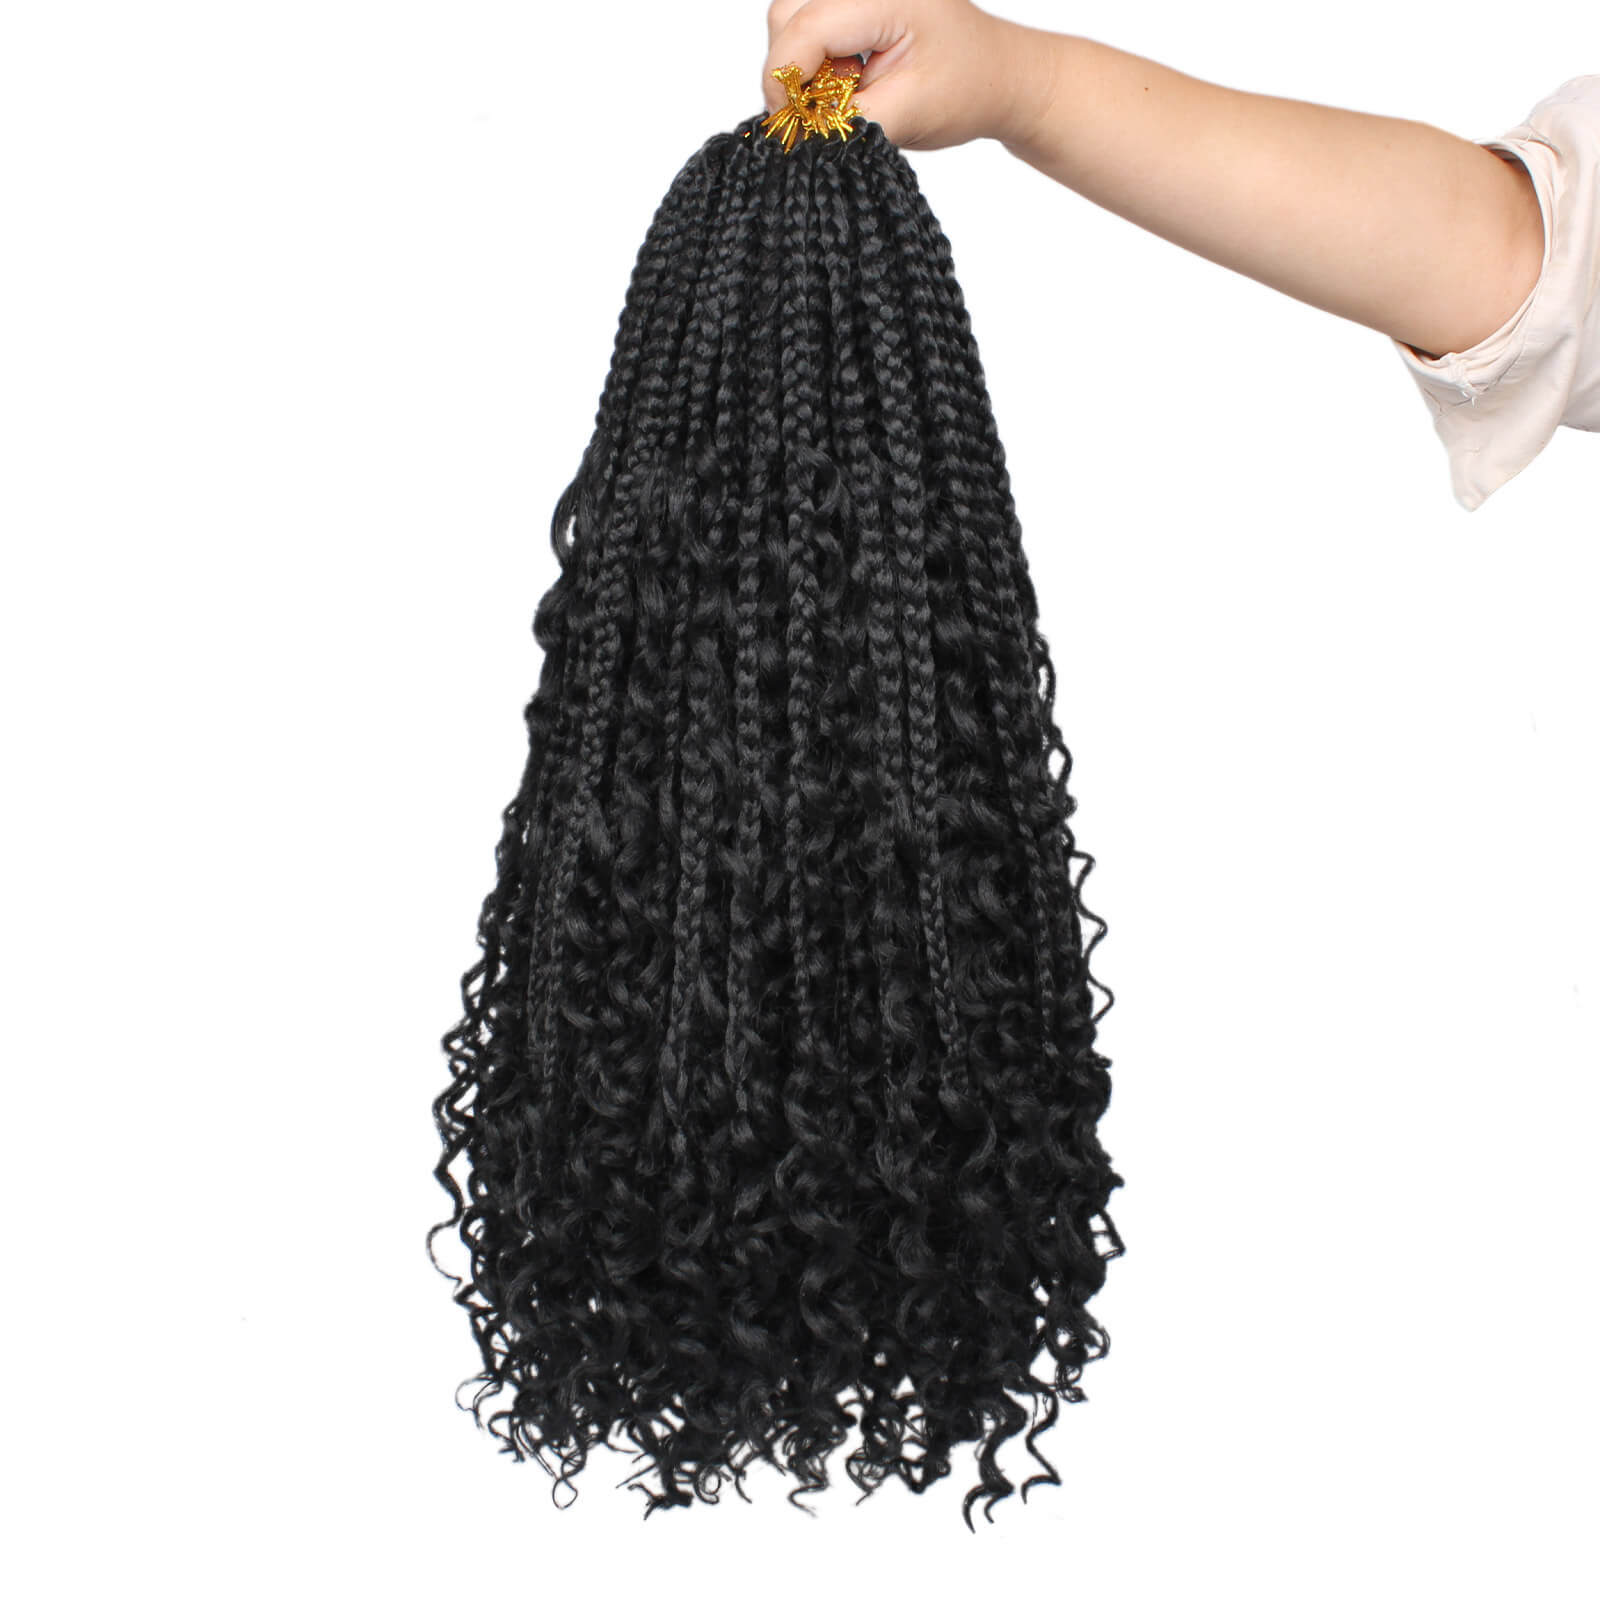 Crochet Box Braids Curly Ends 144 Strands 22 Inch Bohomian Crochet Braids  Box Braids 3X Goddess Box Braids Crochet Hair Synthetic Crochet Braids Hair  Extensions (22inch-6pack, 1B) 22 Inch (Pack of 6) 1B